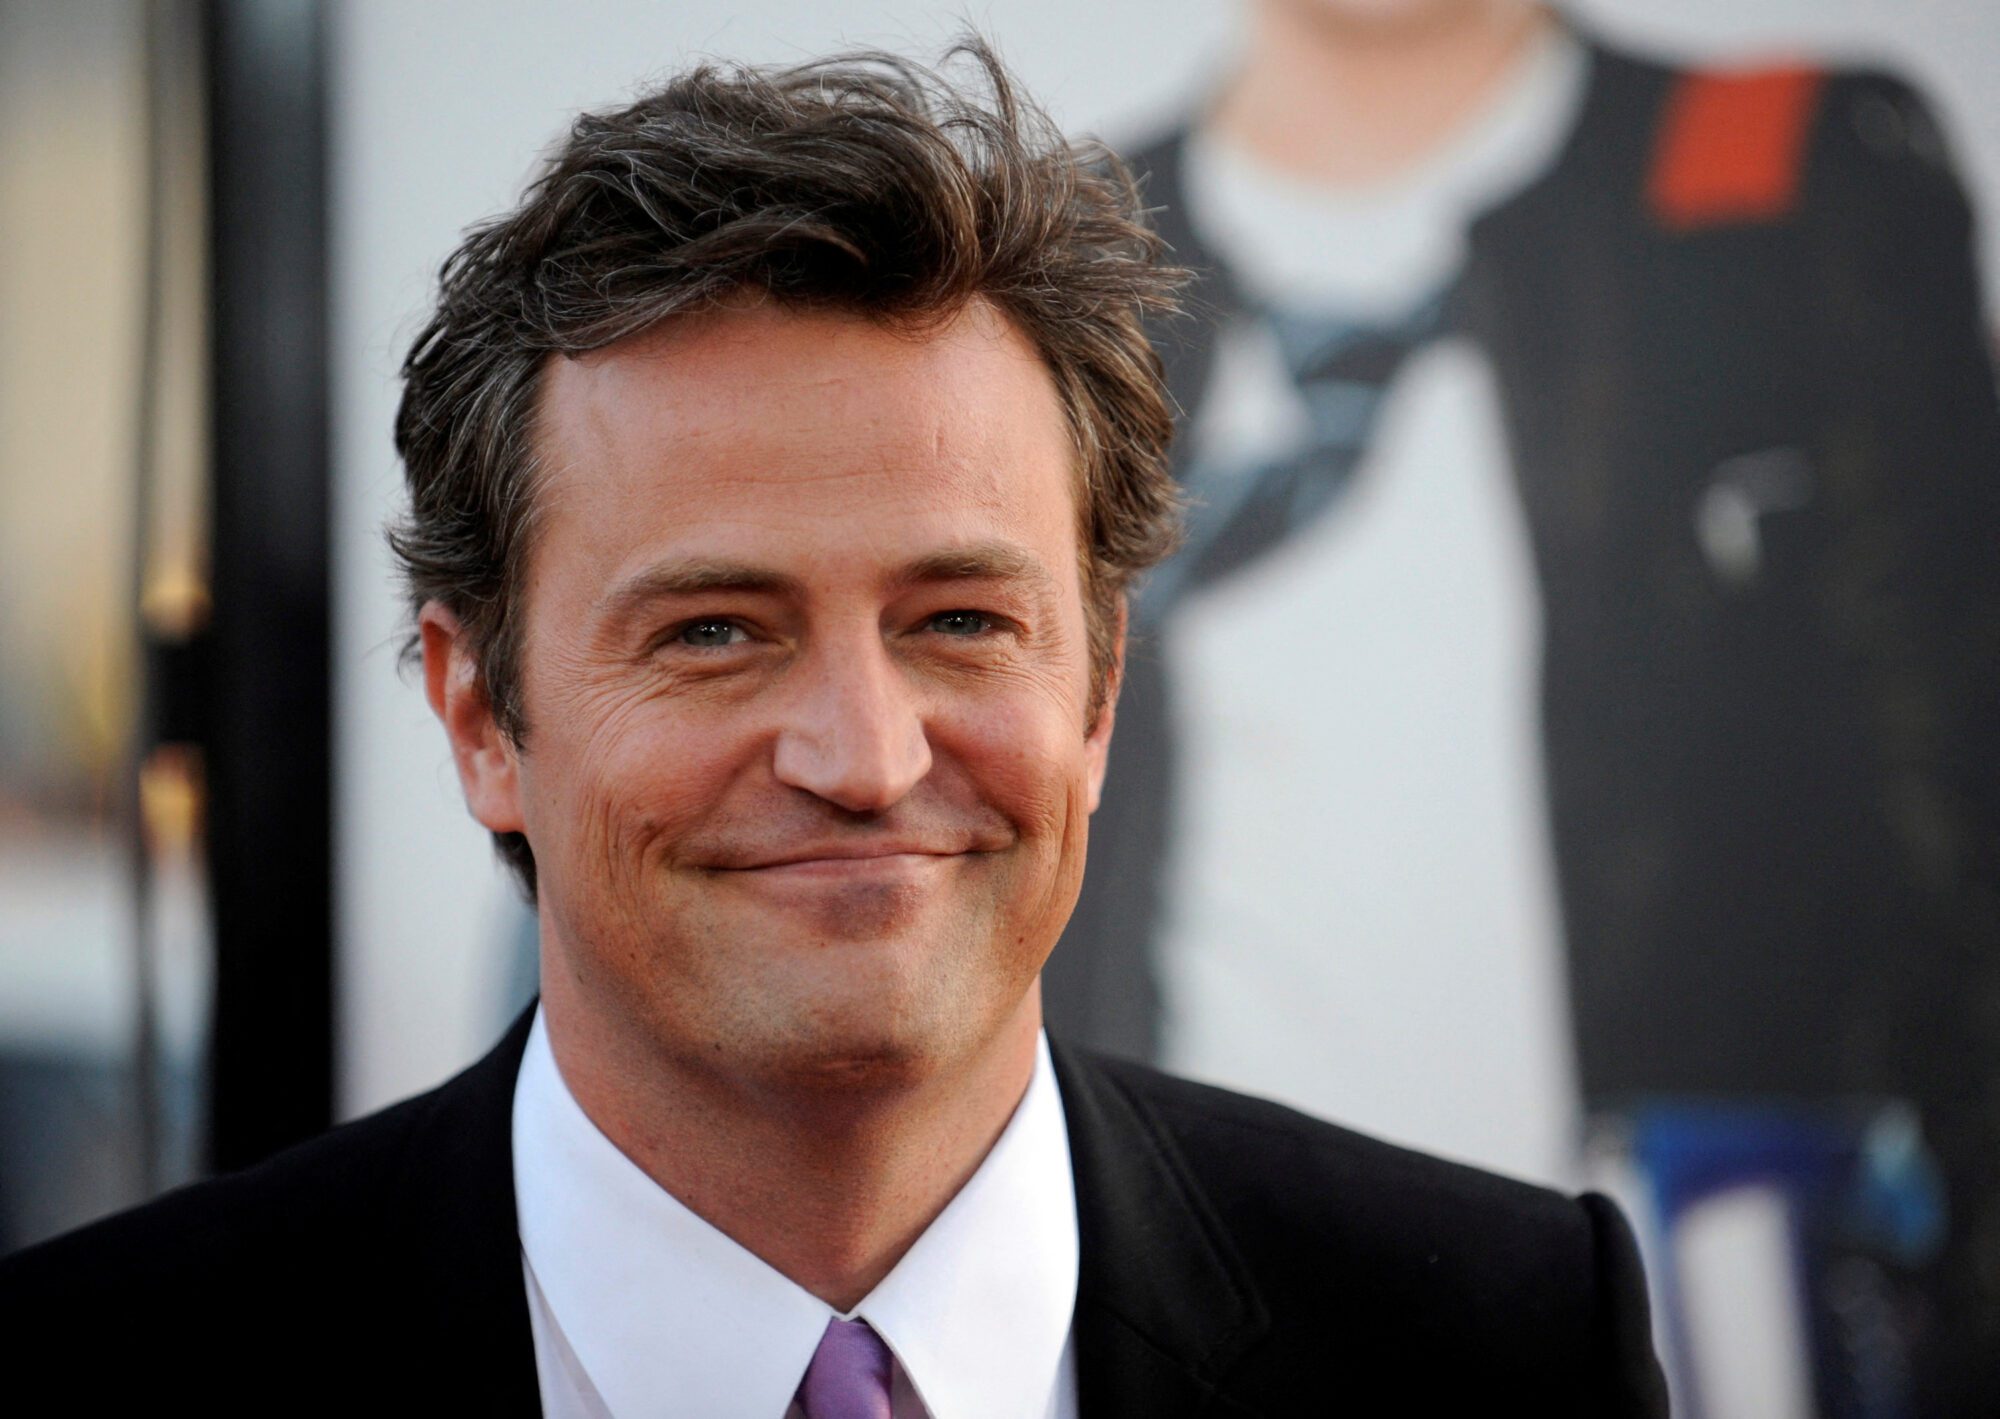 FILE PHOTO: Matthew Perry attends the premiere of the film "17 Again" in Los Angeles April 14, 2009. REUTERS/Phil McCarten/File Photo